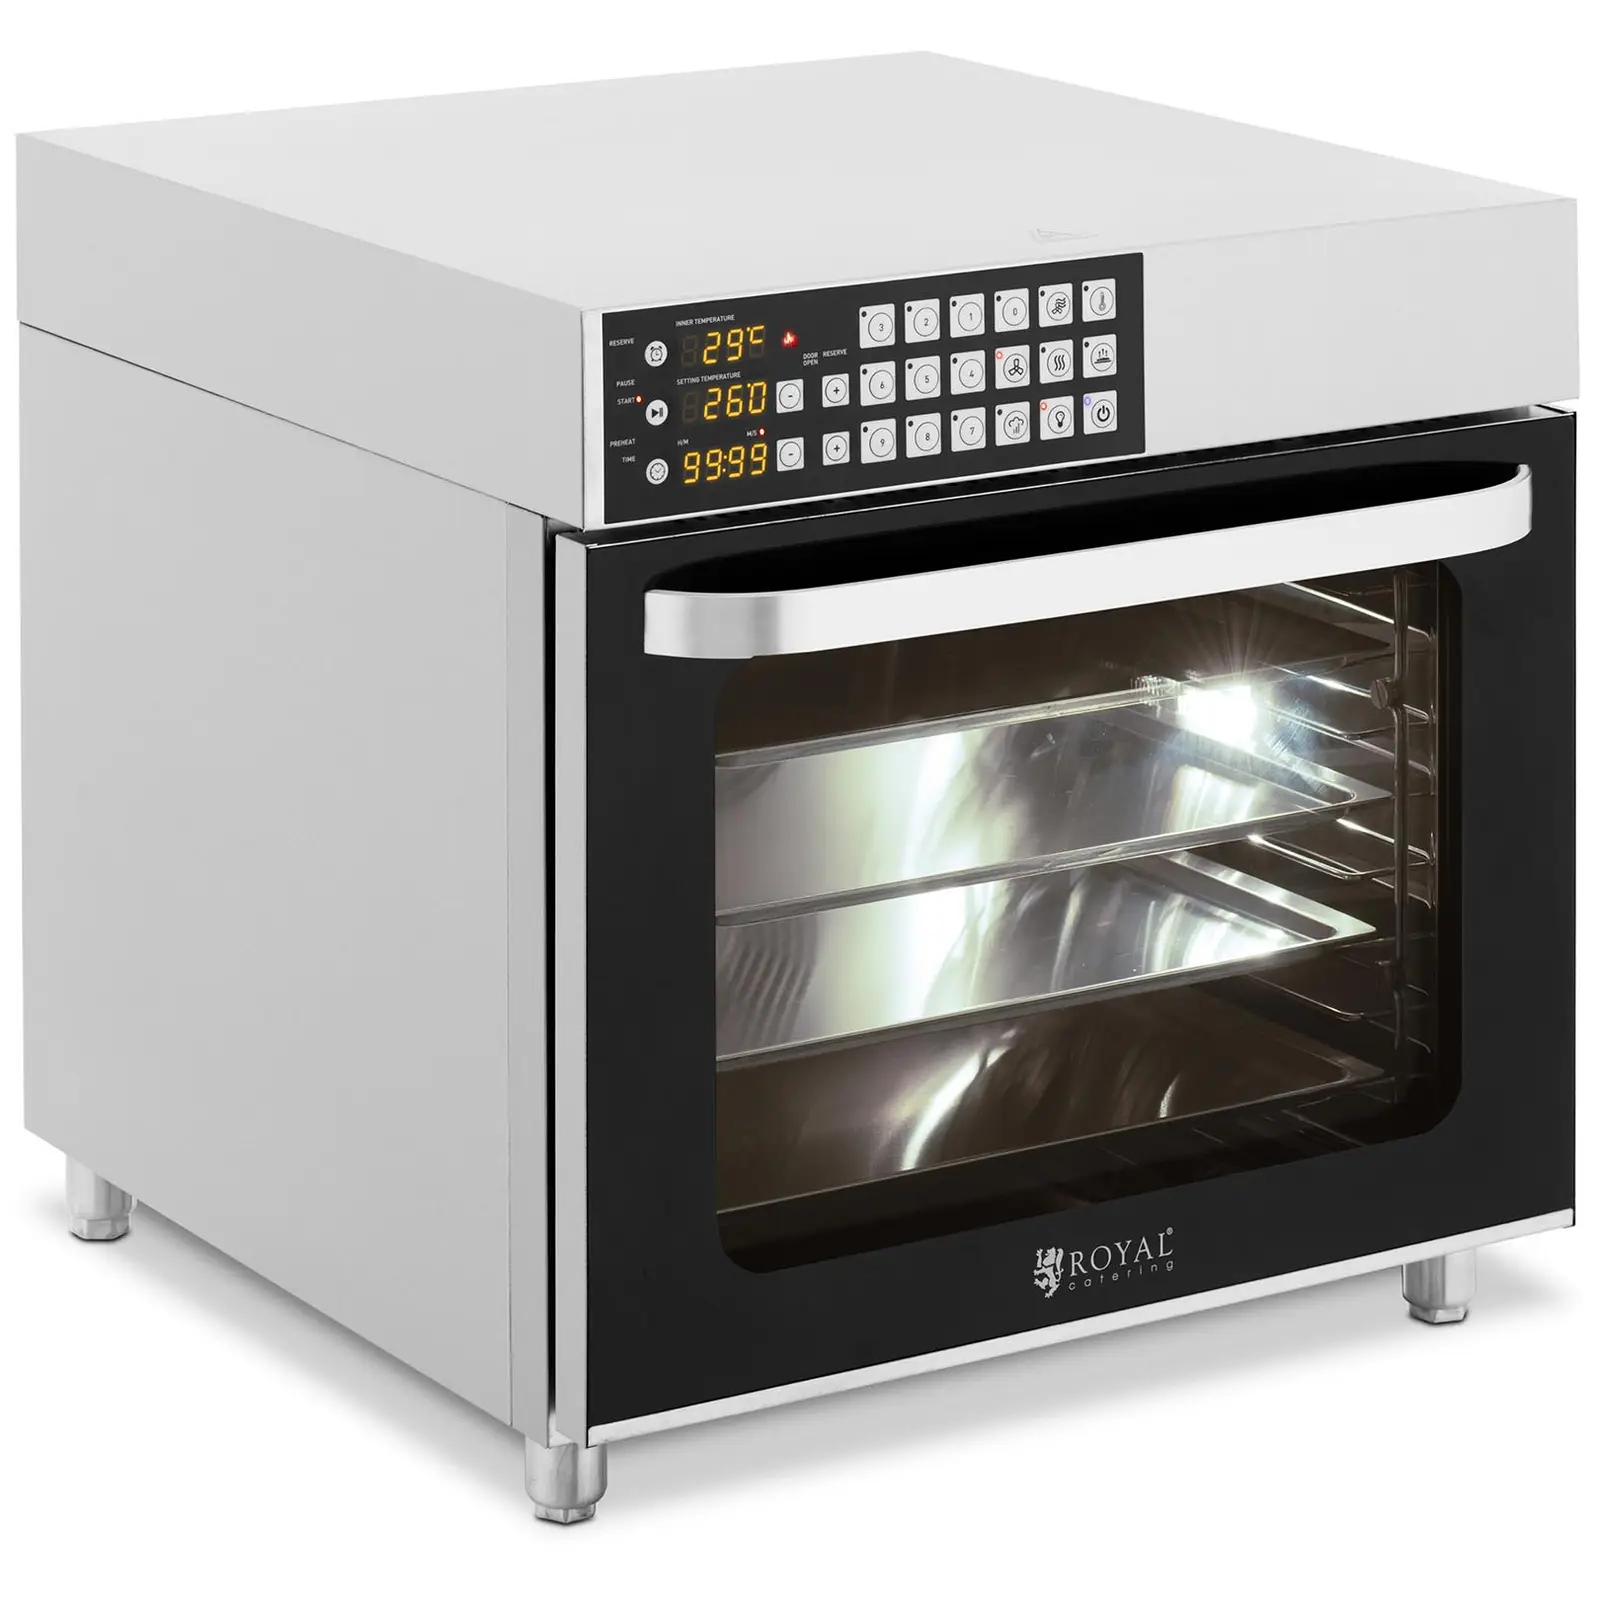 Hot air oven - 2800 W - Timer - 6 functions - 4 Trays - 0